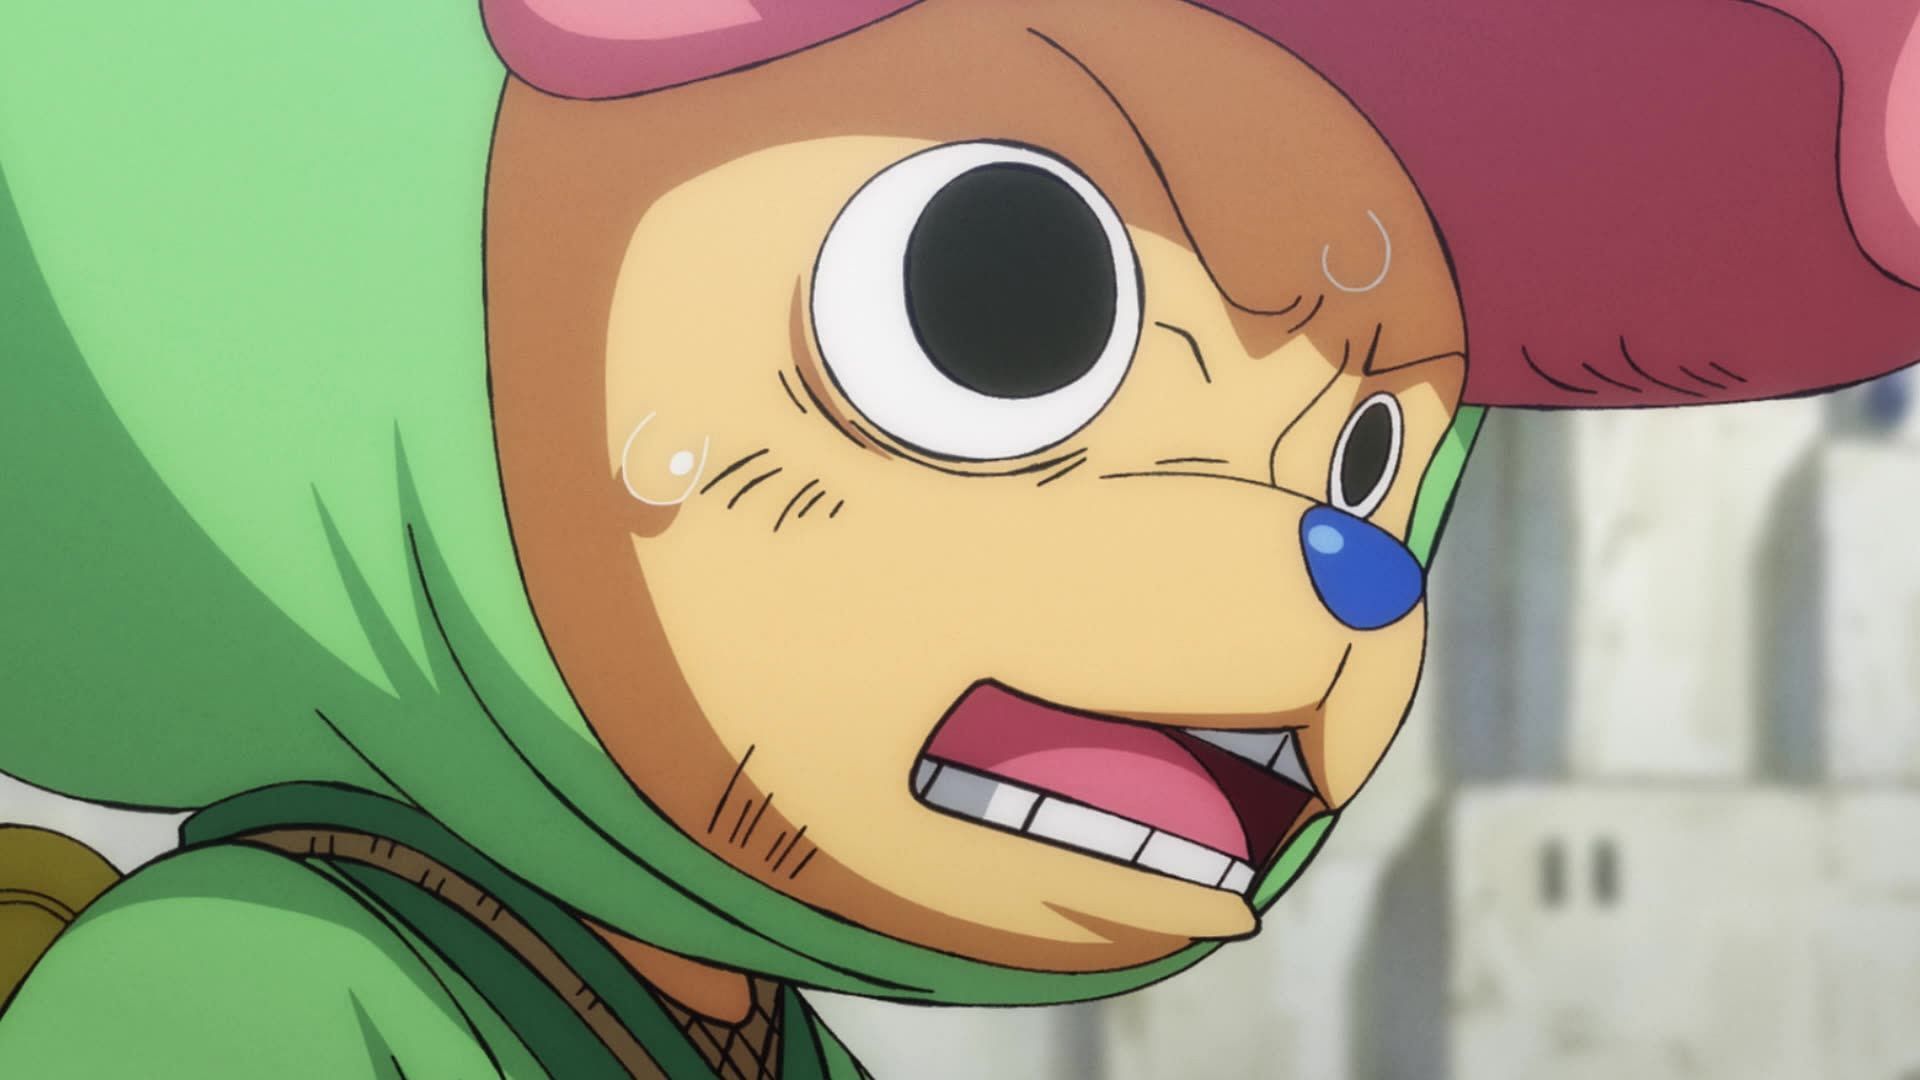 one piece side blog — love how good chopper's been in wano! so far he's